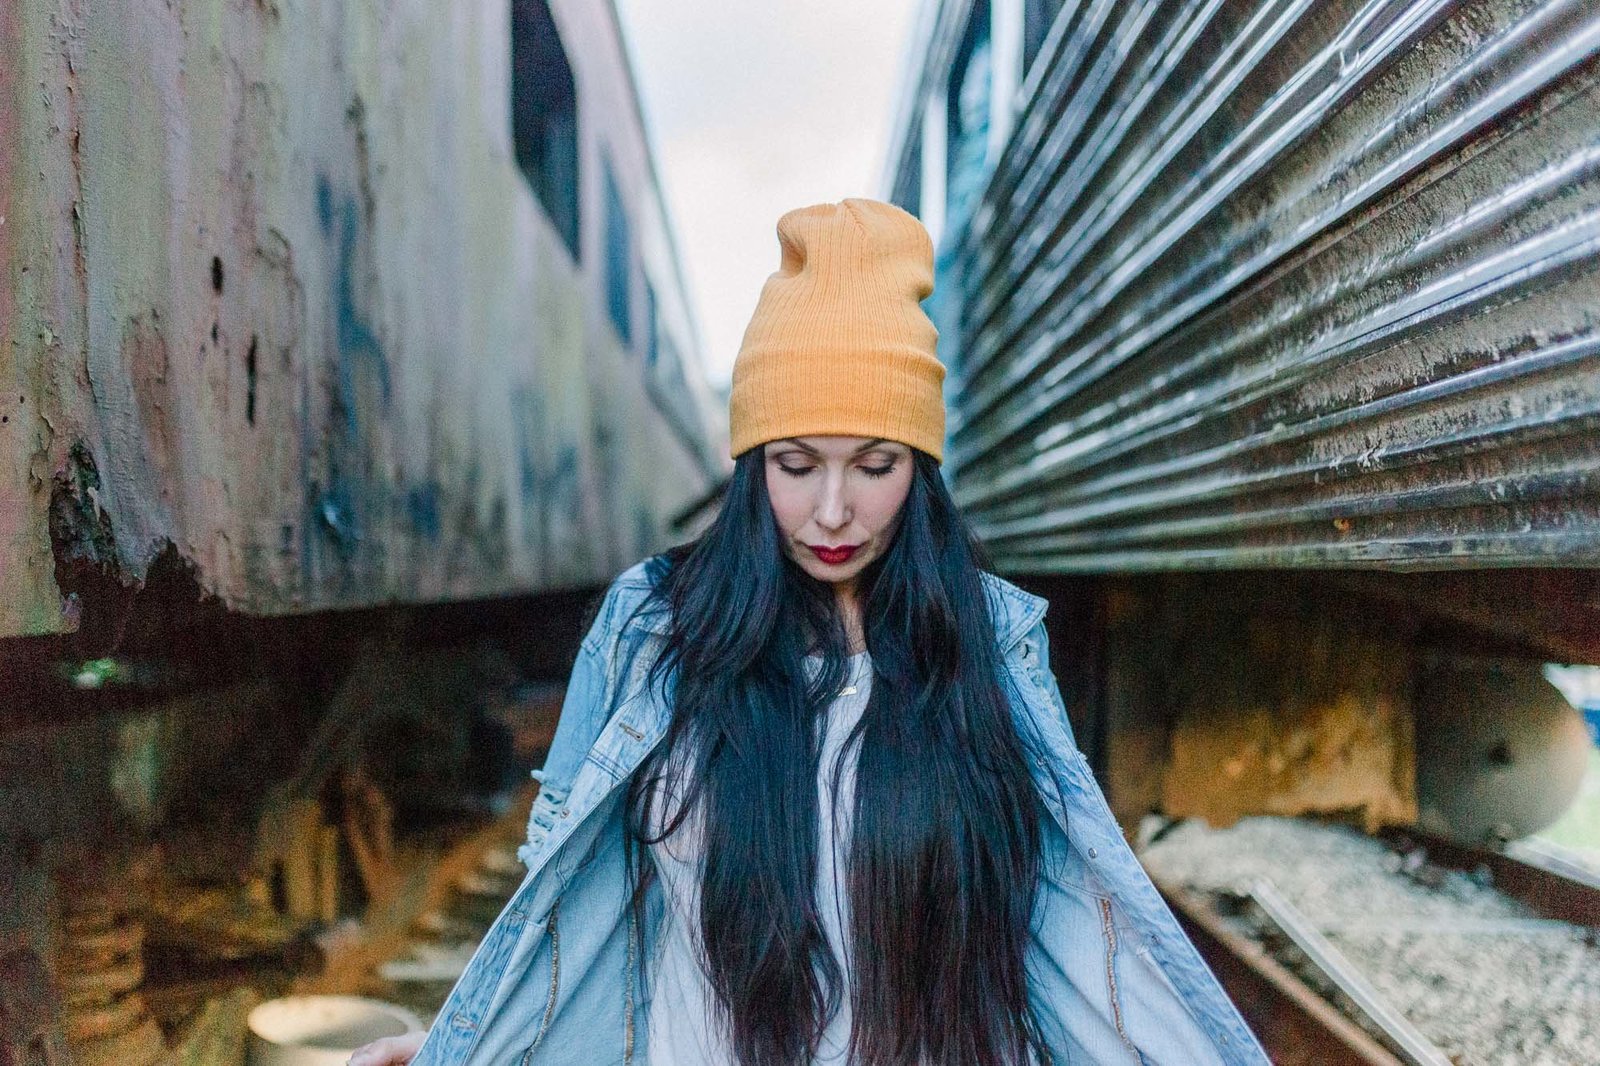 Walking through the train cars captured by Staci Addison Photography